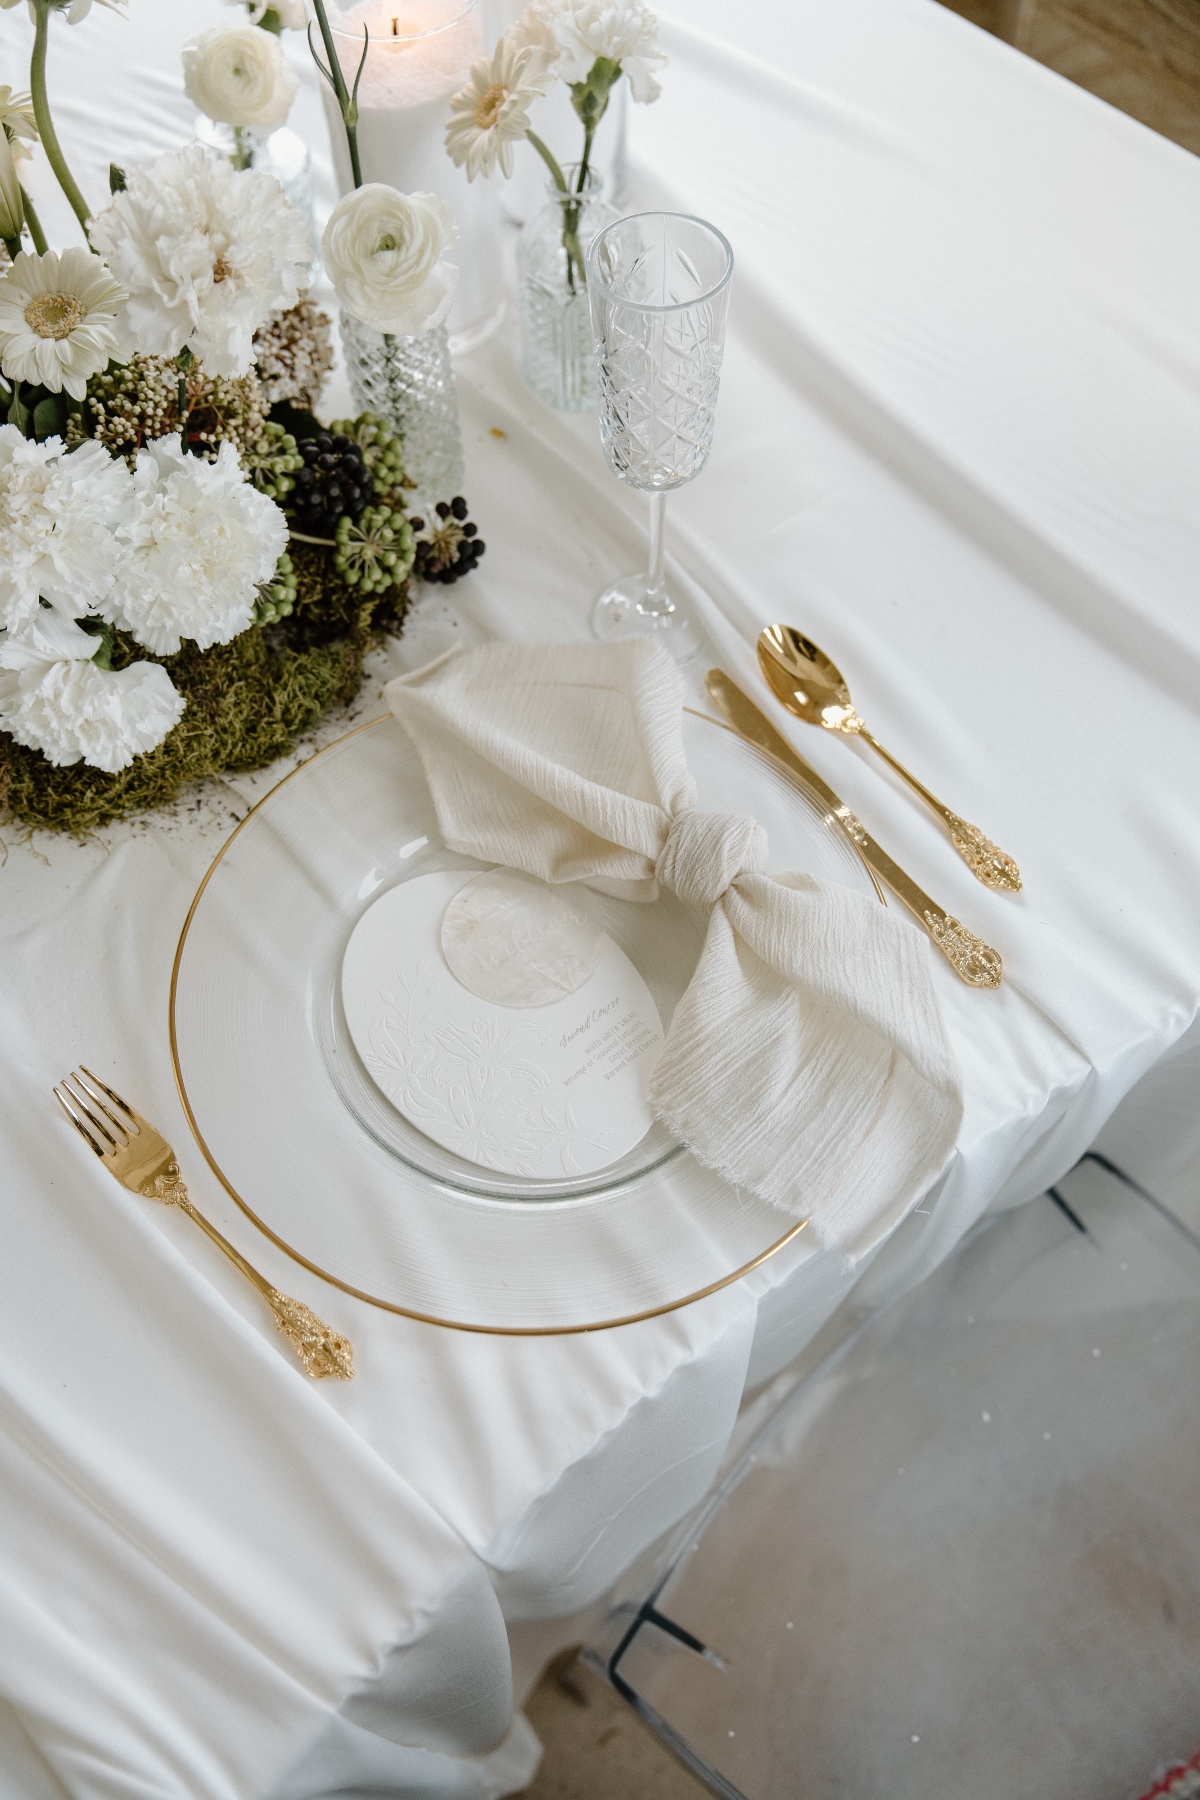 clear place settings with gold flatware